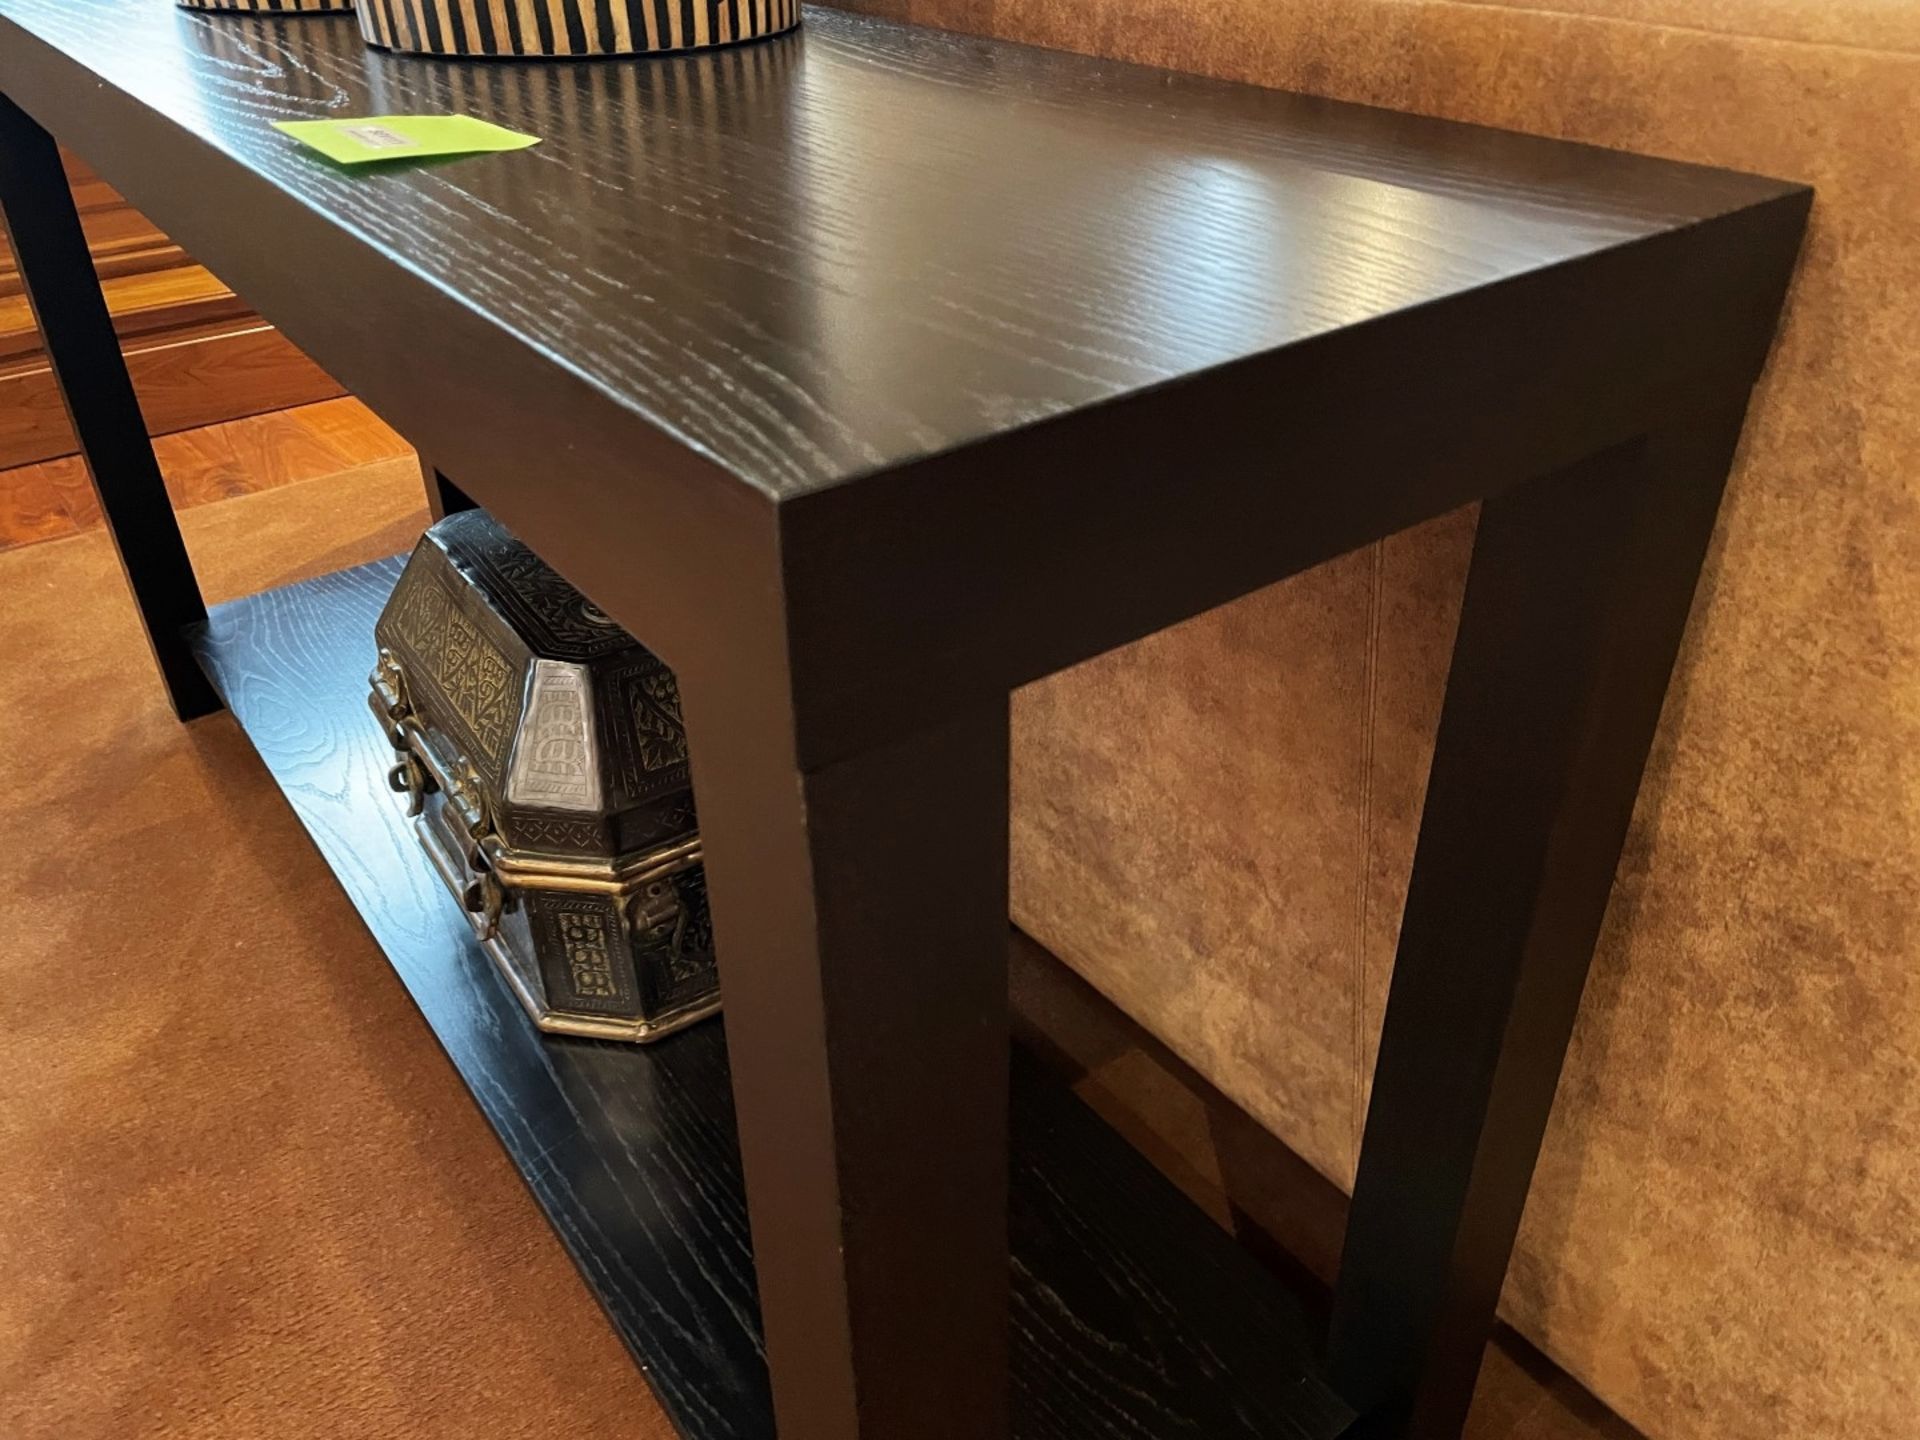 1 x Solid Wood Console Table In A Dark Wenge Stain - Dimensions: H78 x W150 x D40cm - Ref: SGV111 - - Image 6 of 8